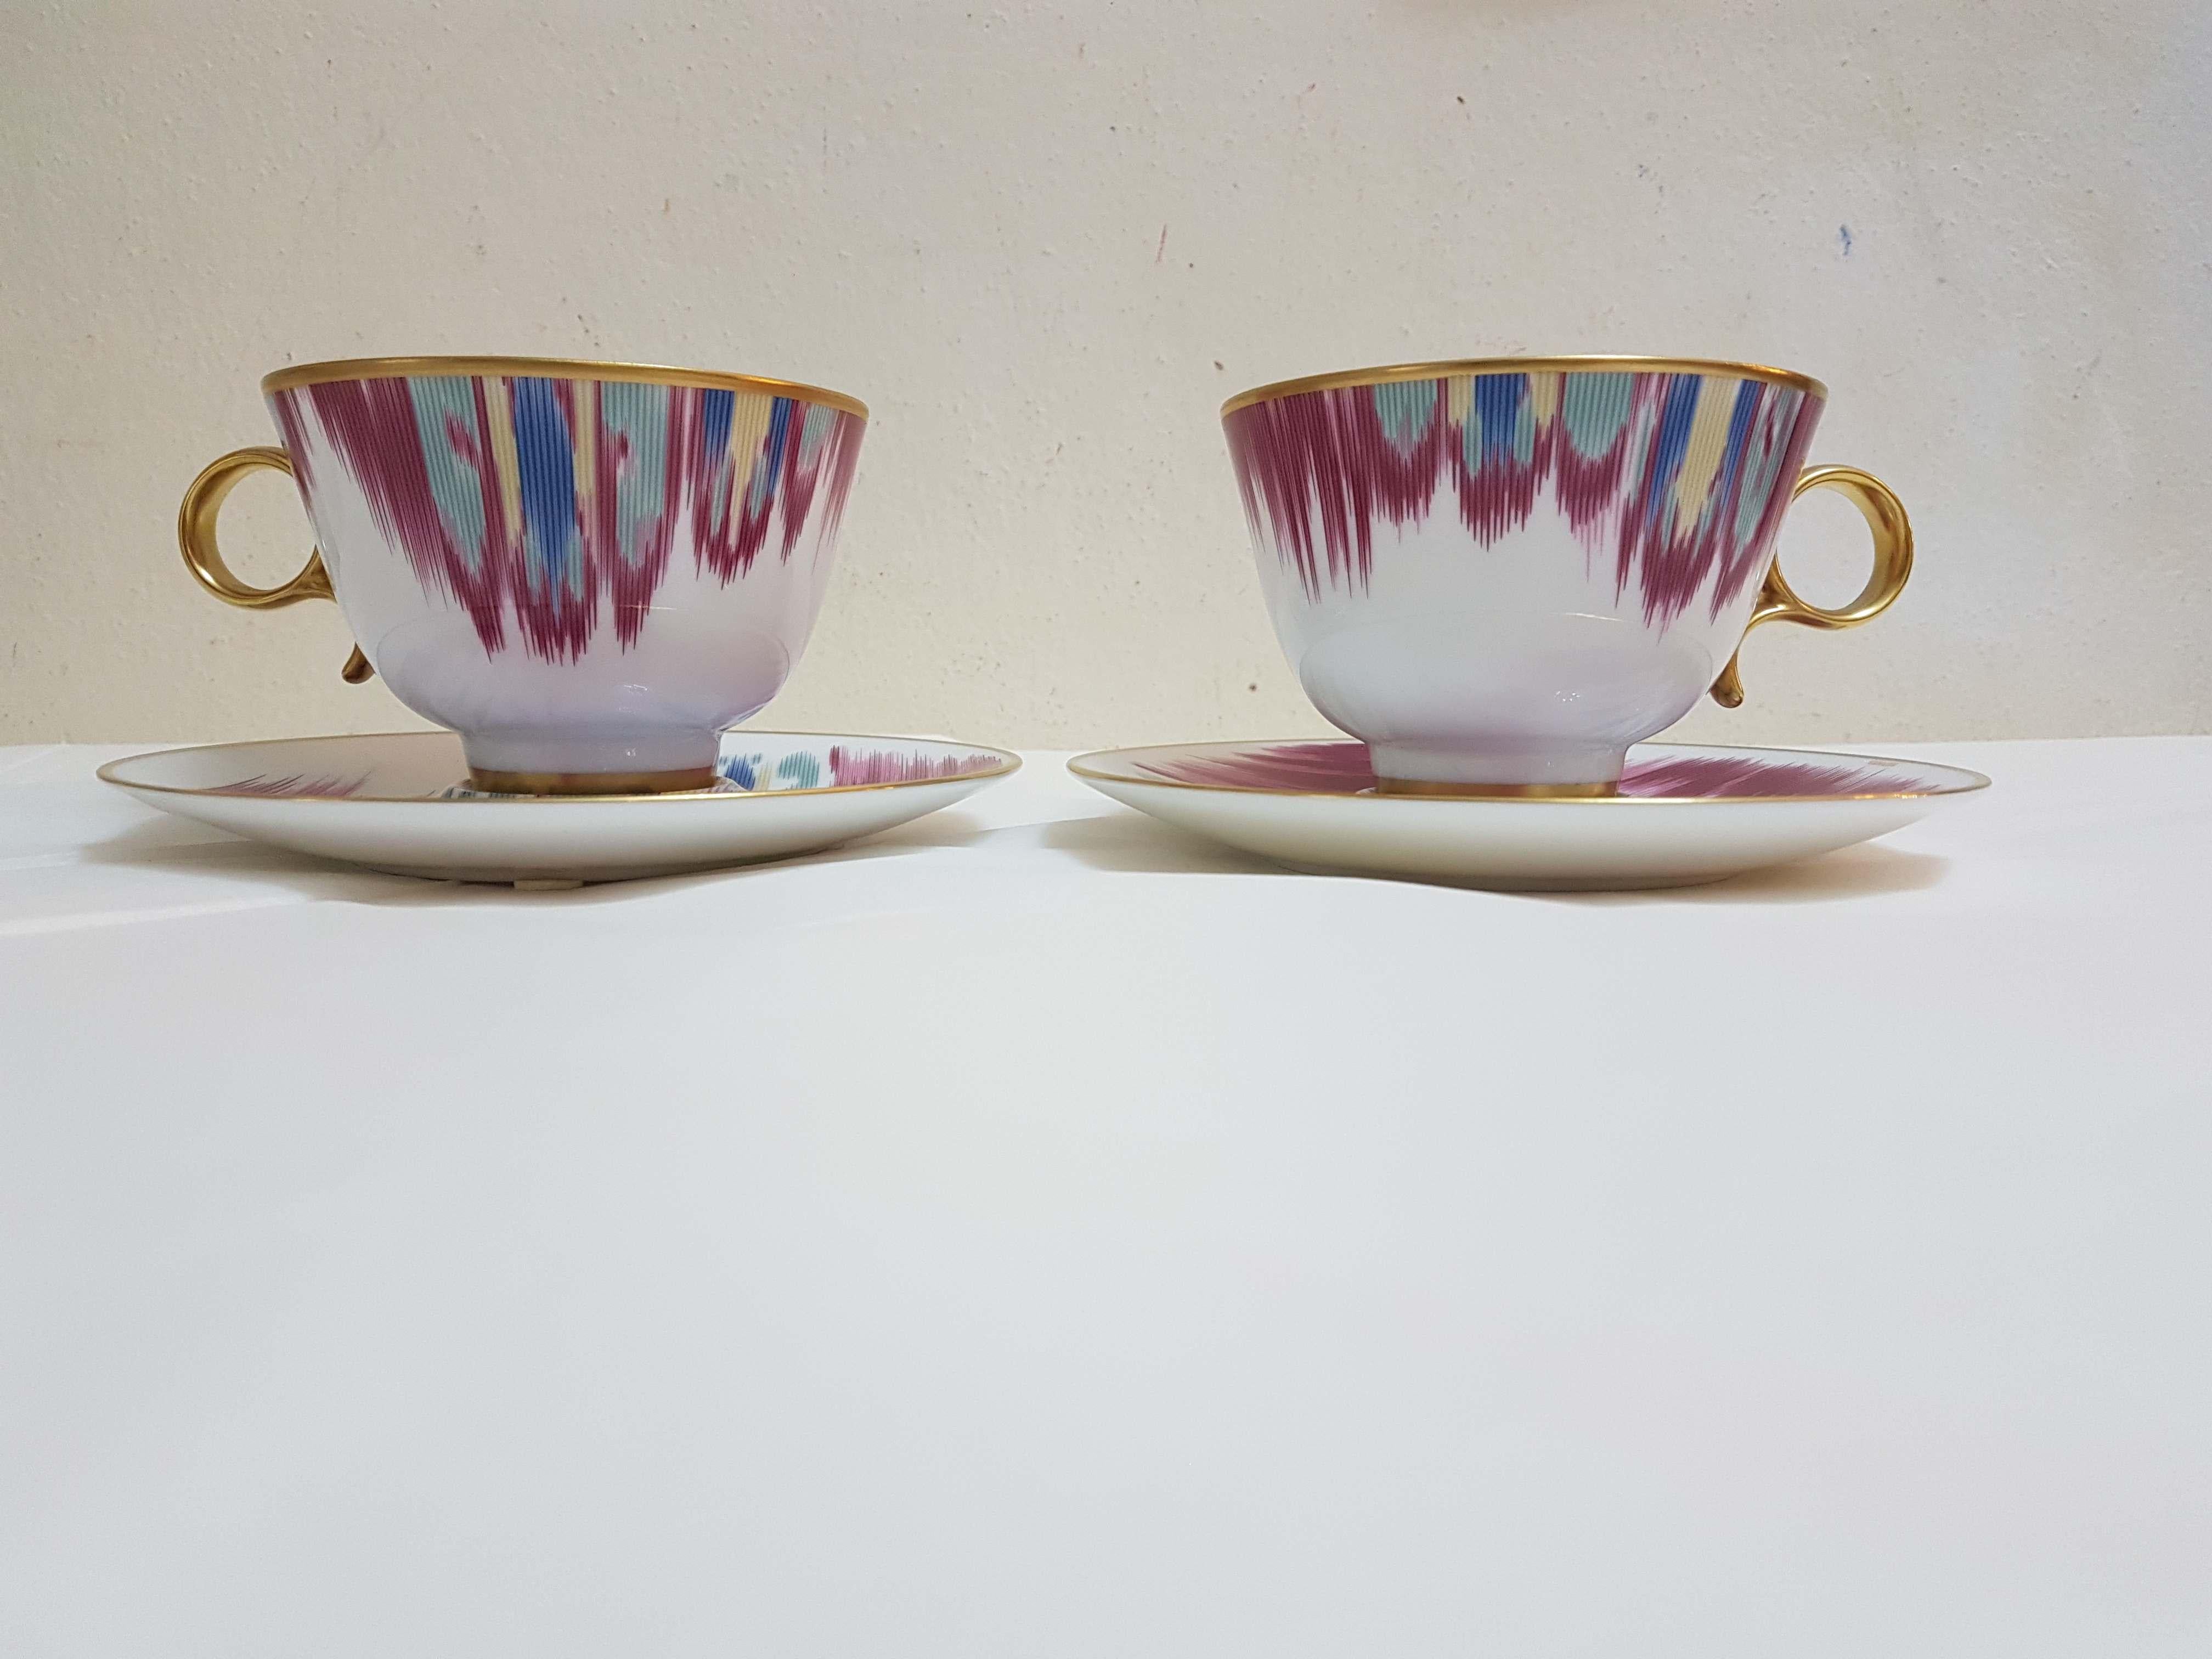 An Hermès porcelain set of two tea cups and saucers, 